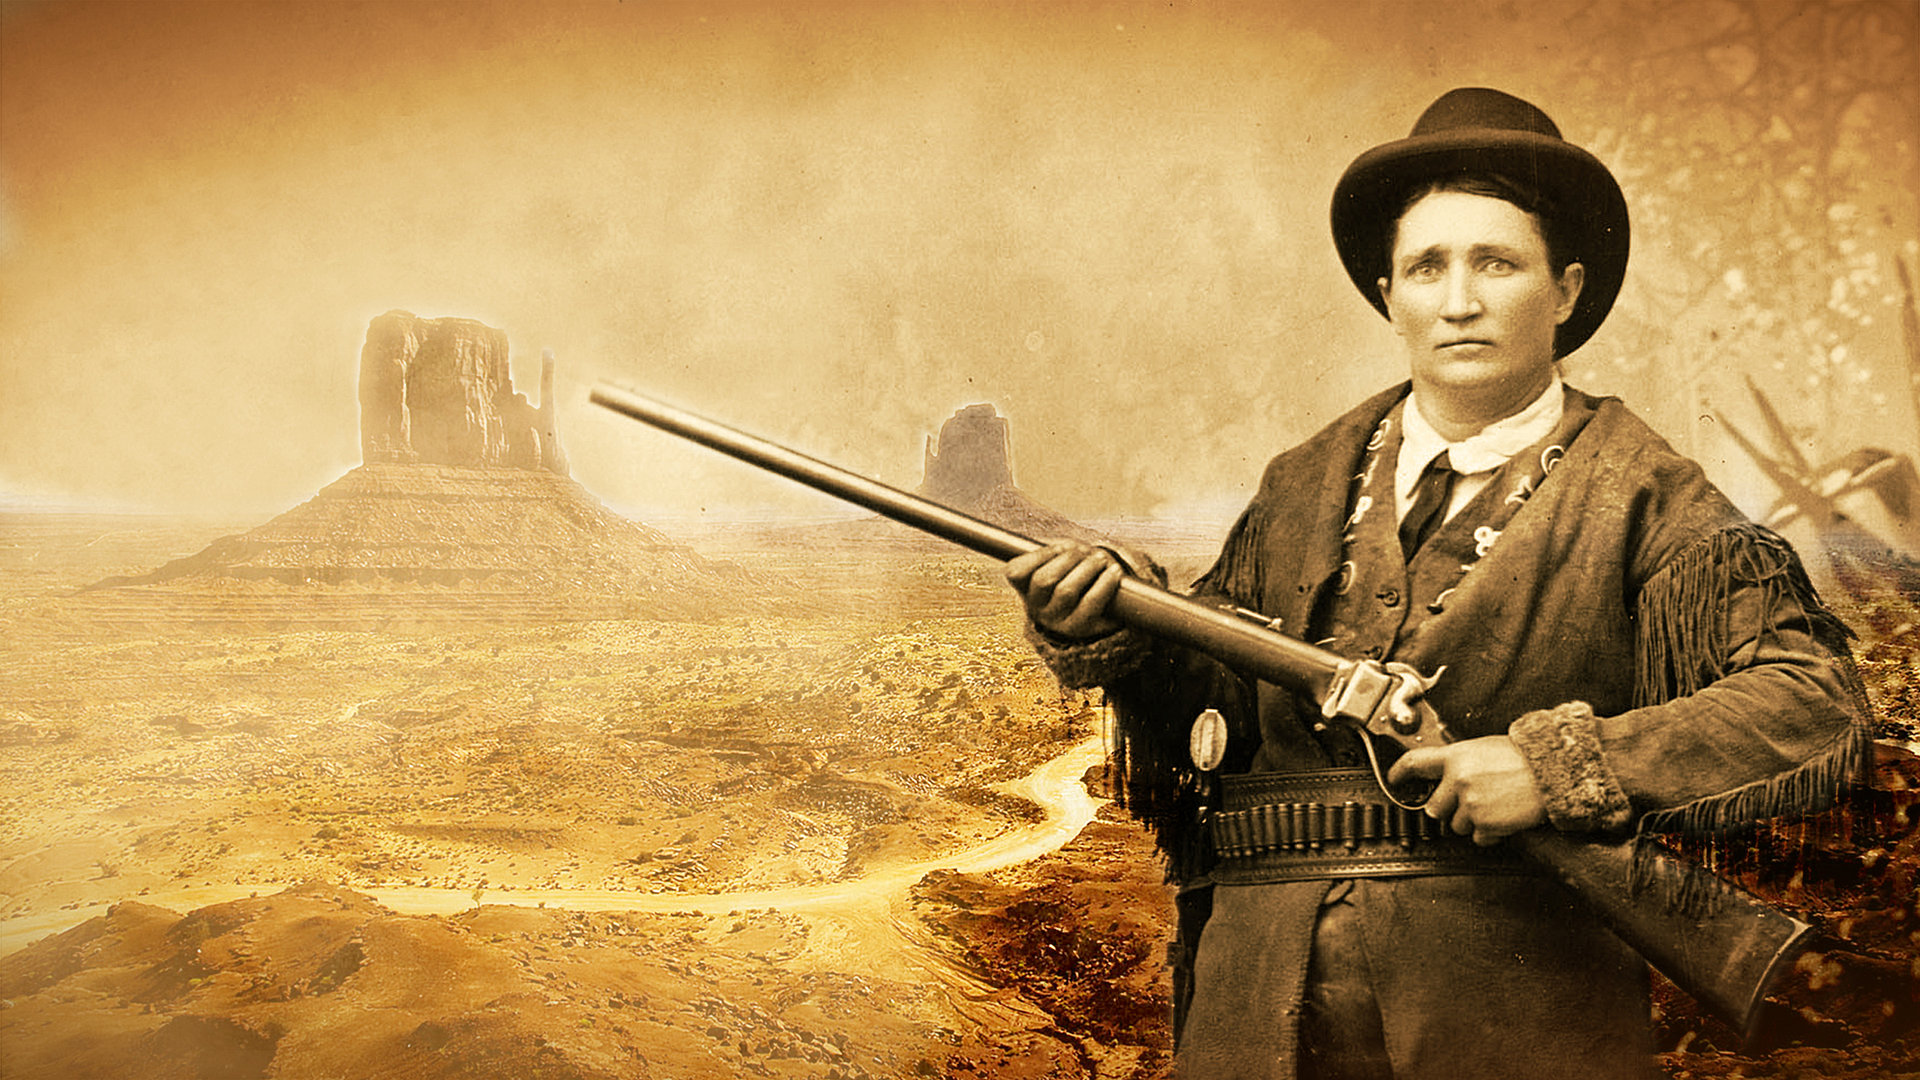 Calamity Jane: Legend of the West